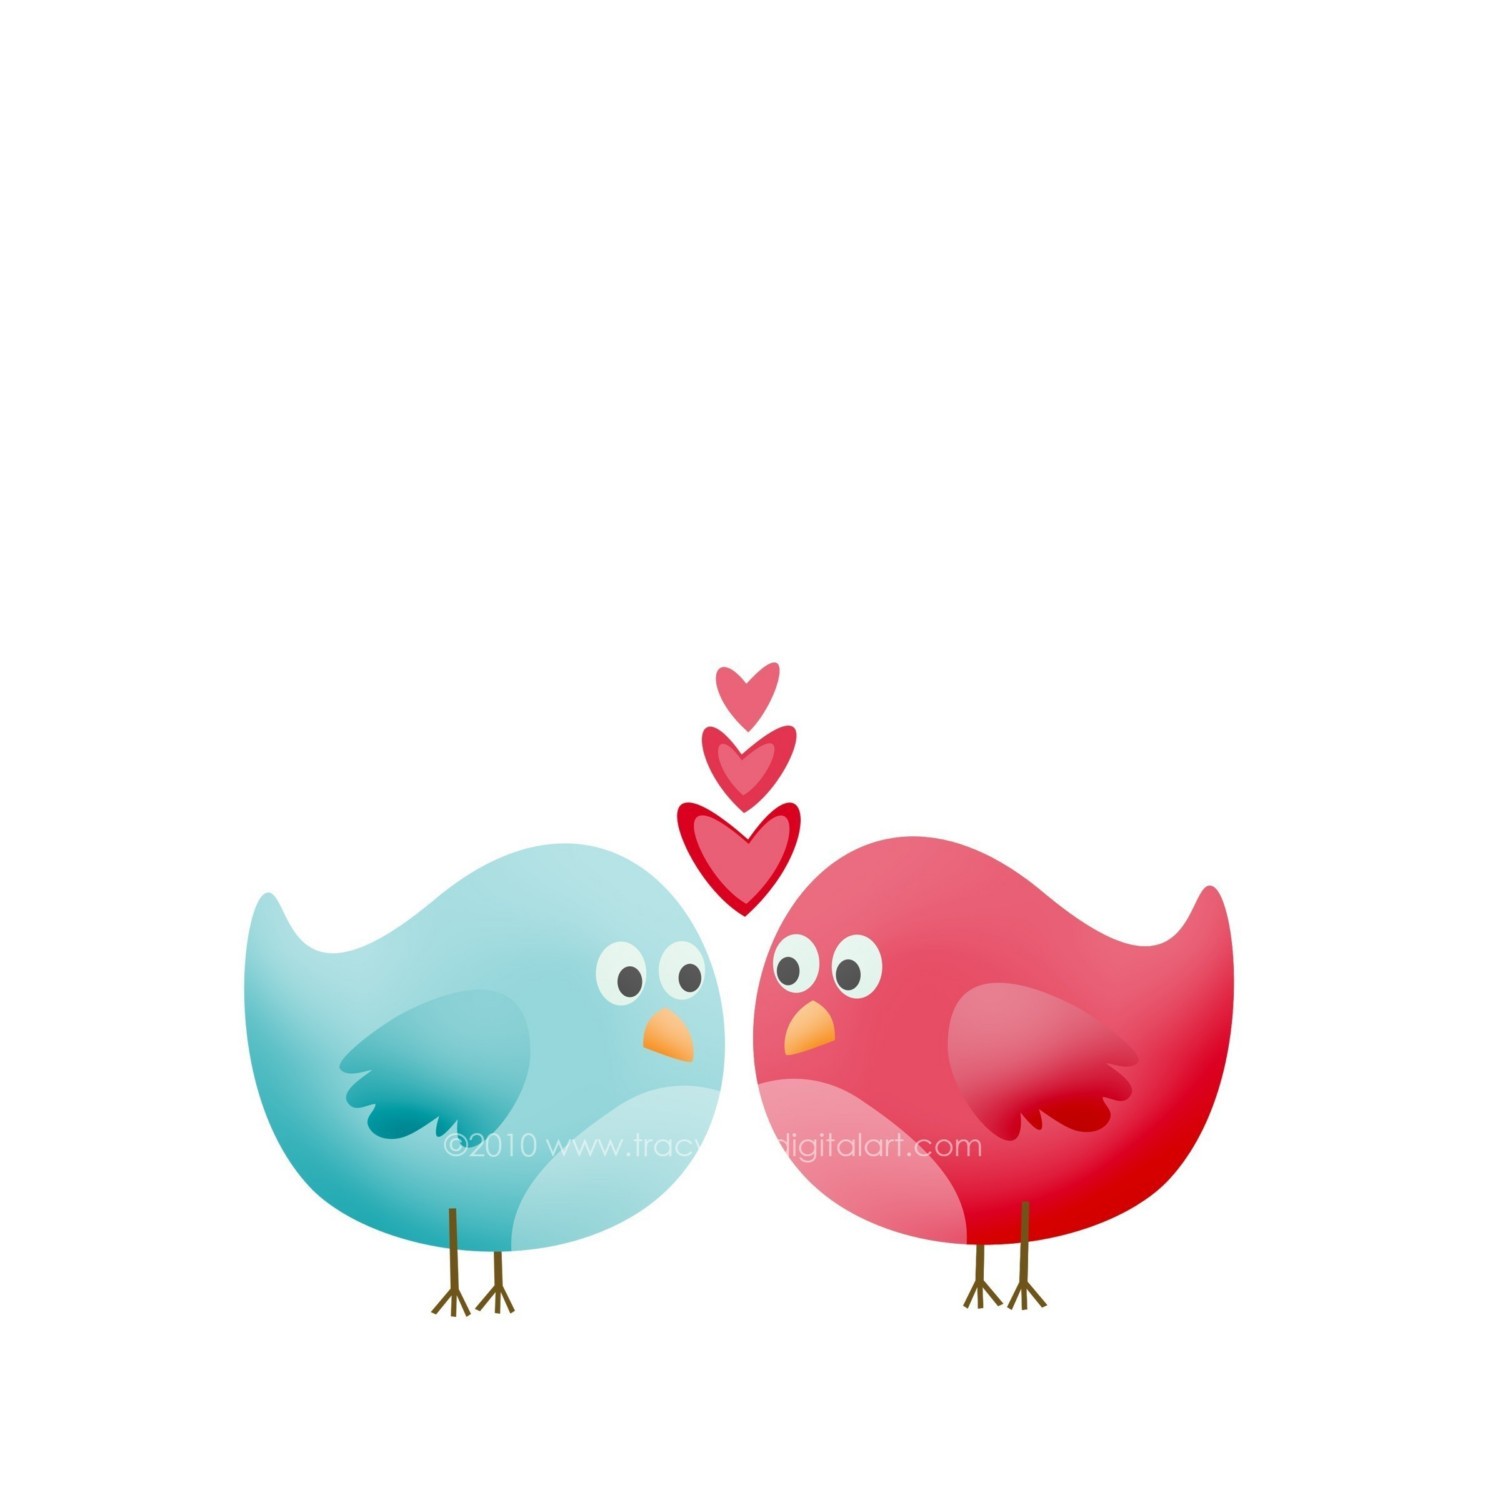 free clipart images love birds - photo #17